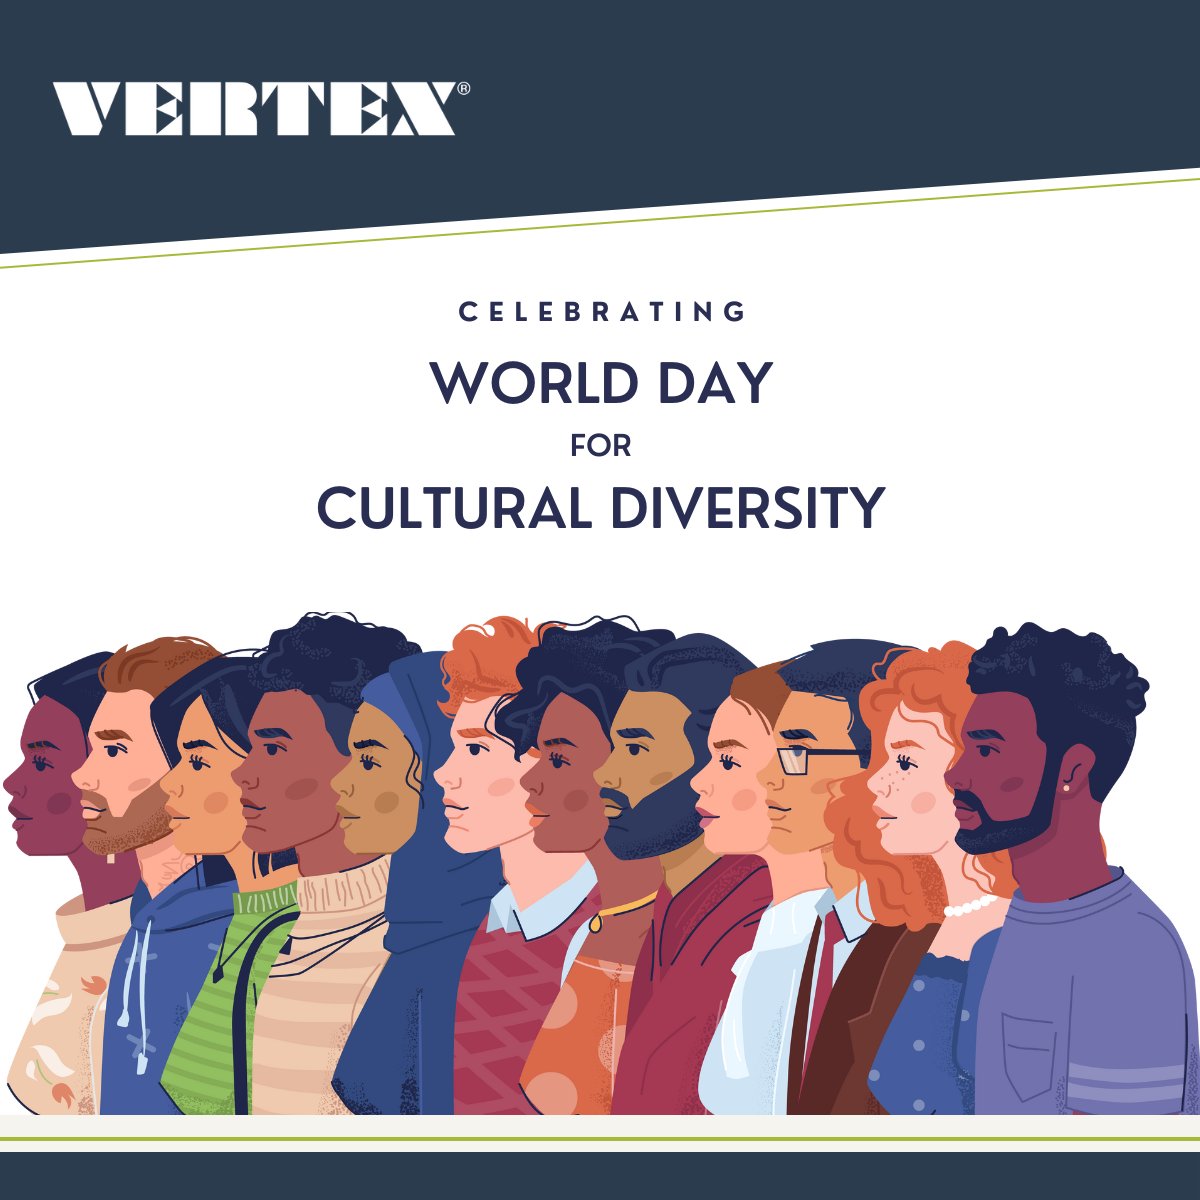 Celebrating World Day for Cultural Diversity! At VERTEX, our diverse team brings unique backgrounds and talents together, united by a passion for delivering exceptional value and results to our clients.

#CulturalDiversity #Inclusion #VertexEng